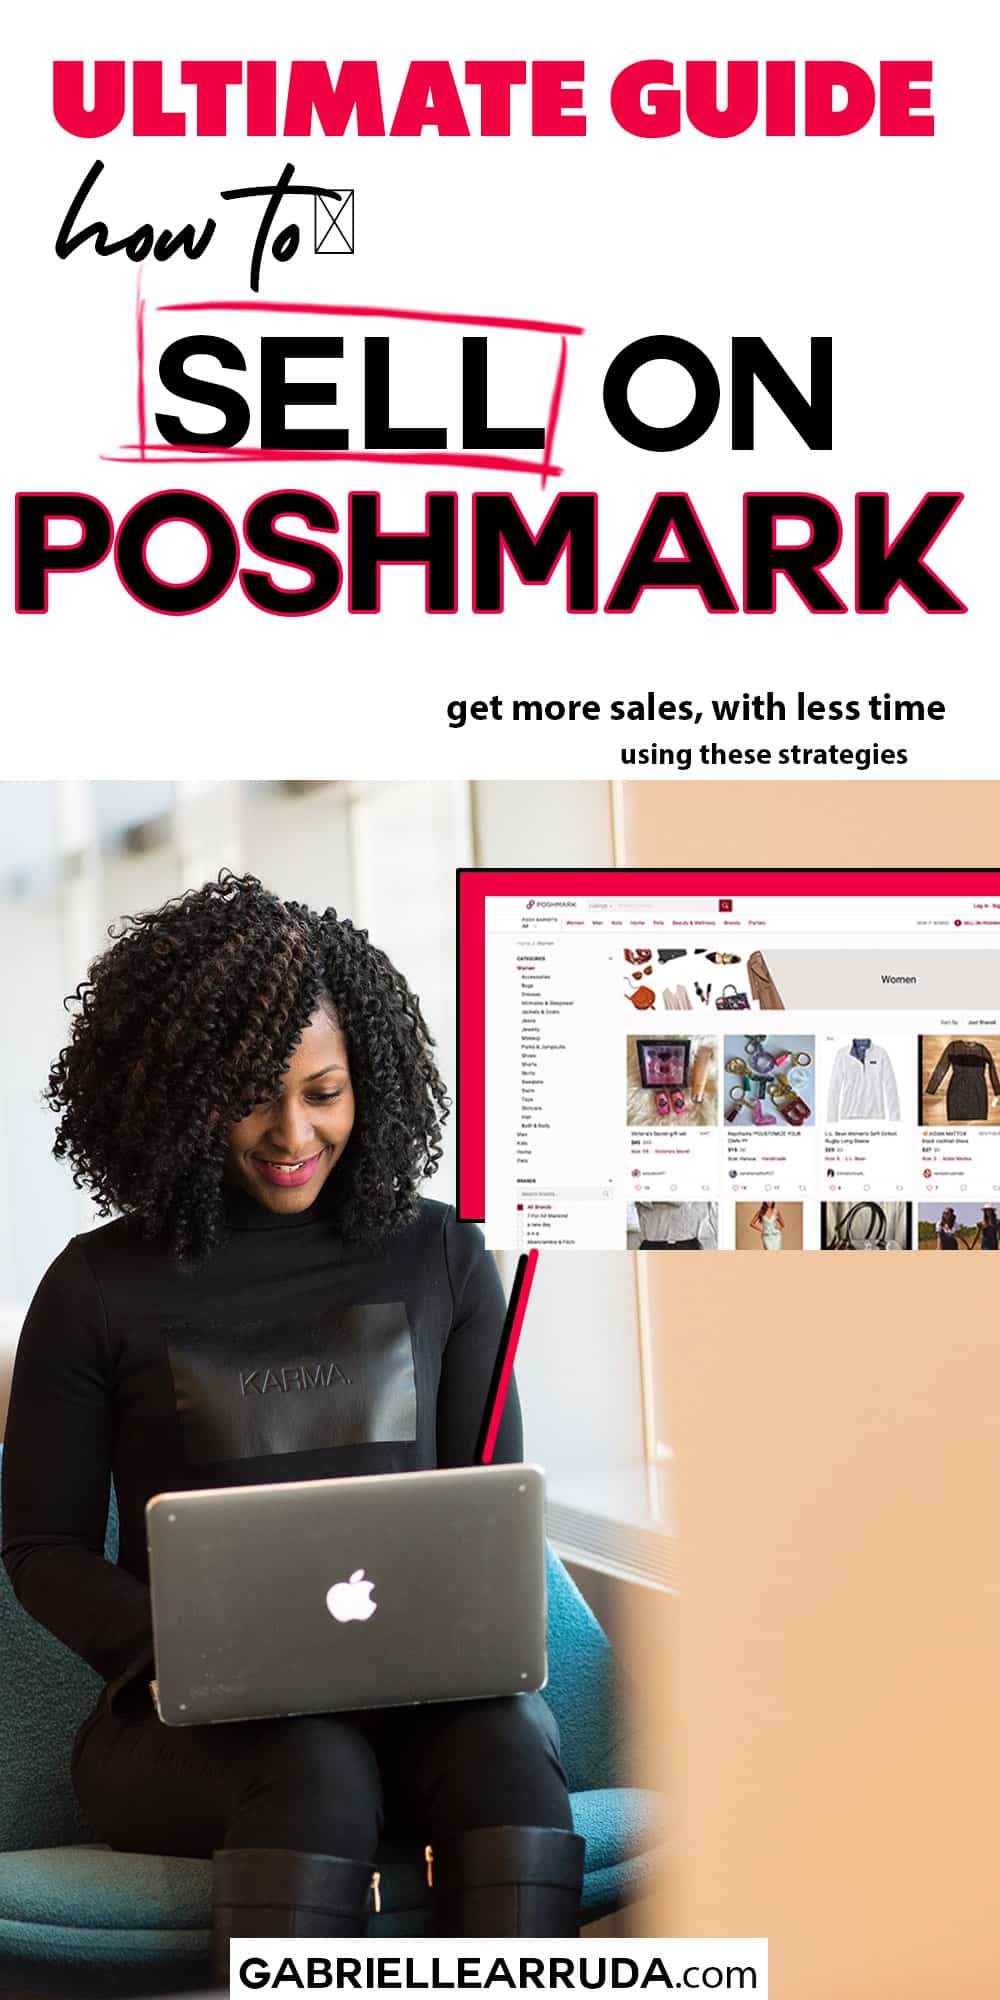 ultimate guide how to sell on poshmark- woman creating listing on computer